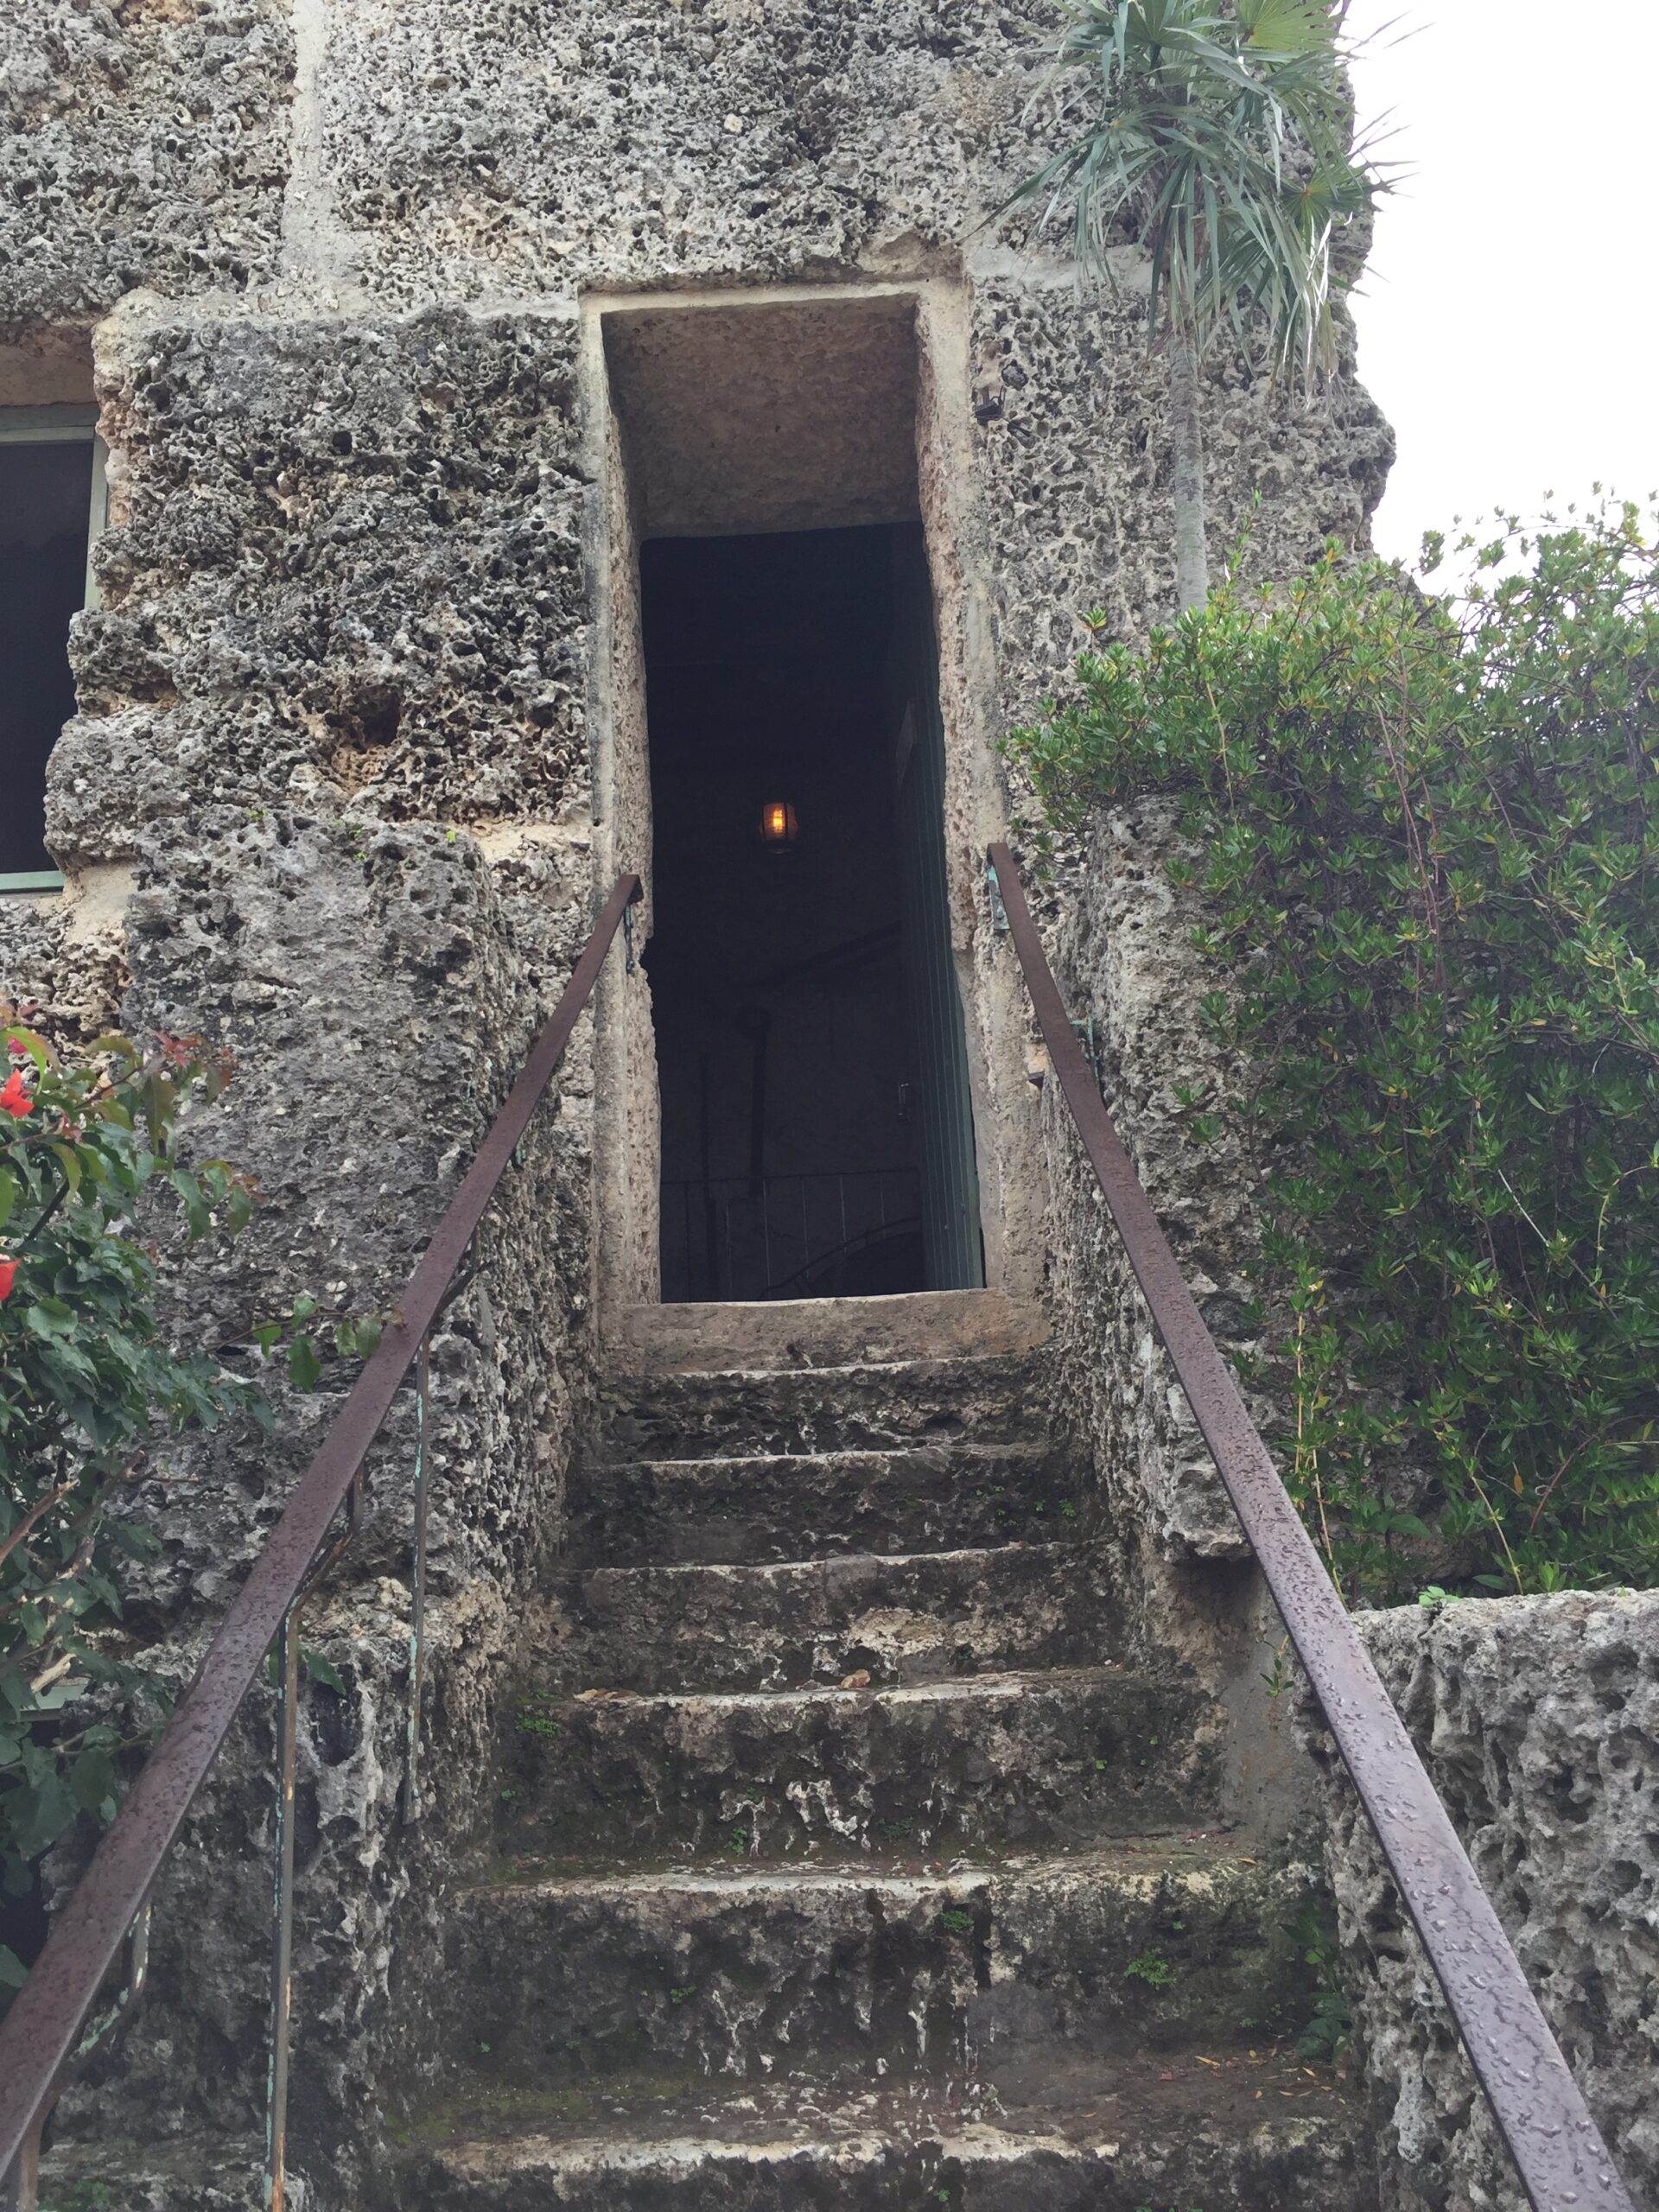 Secrets of Coral Castle, With Carolyn And Monty - Telekinesis And Anti-Gravity